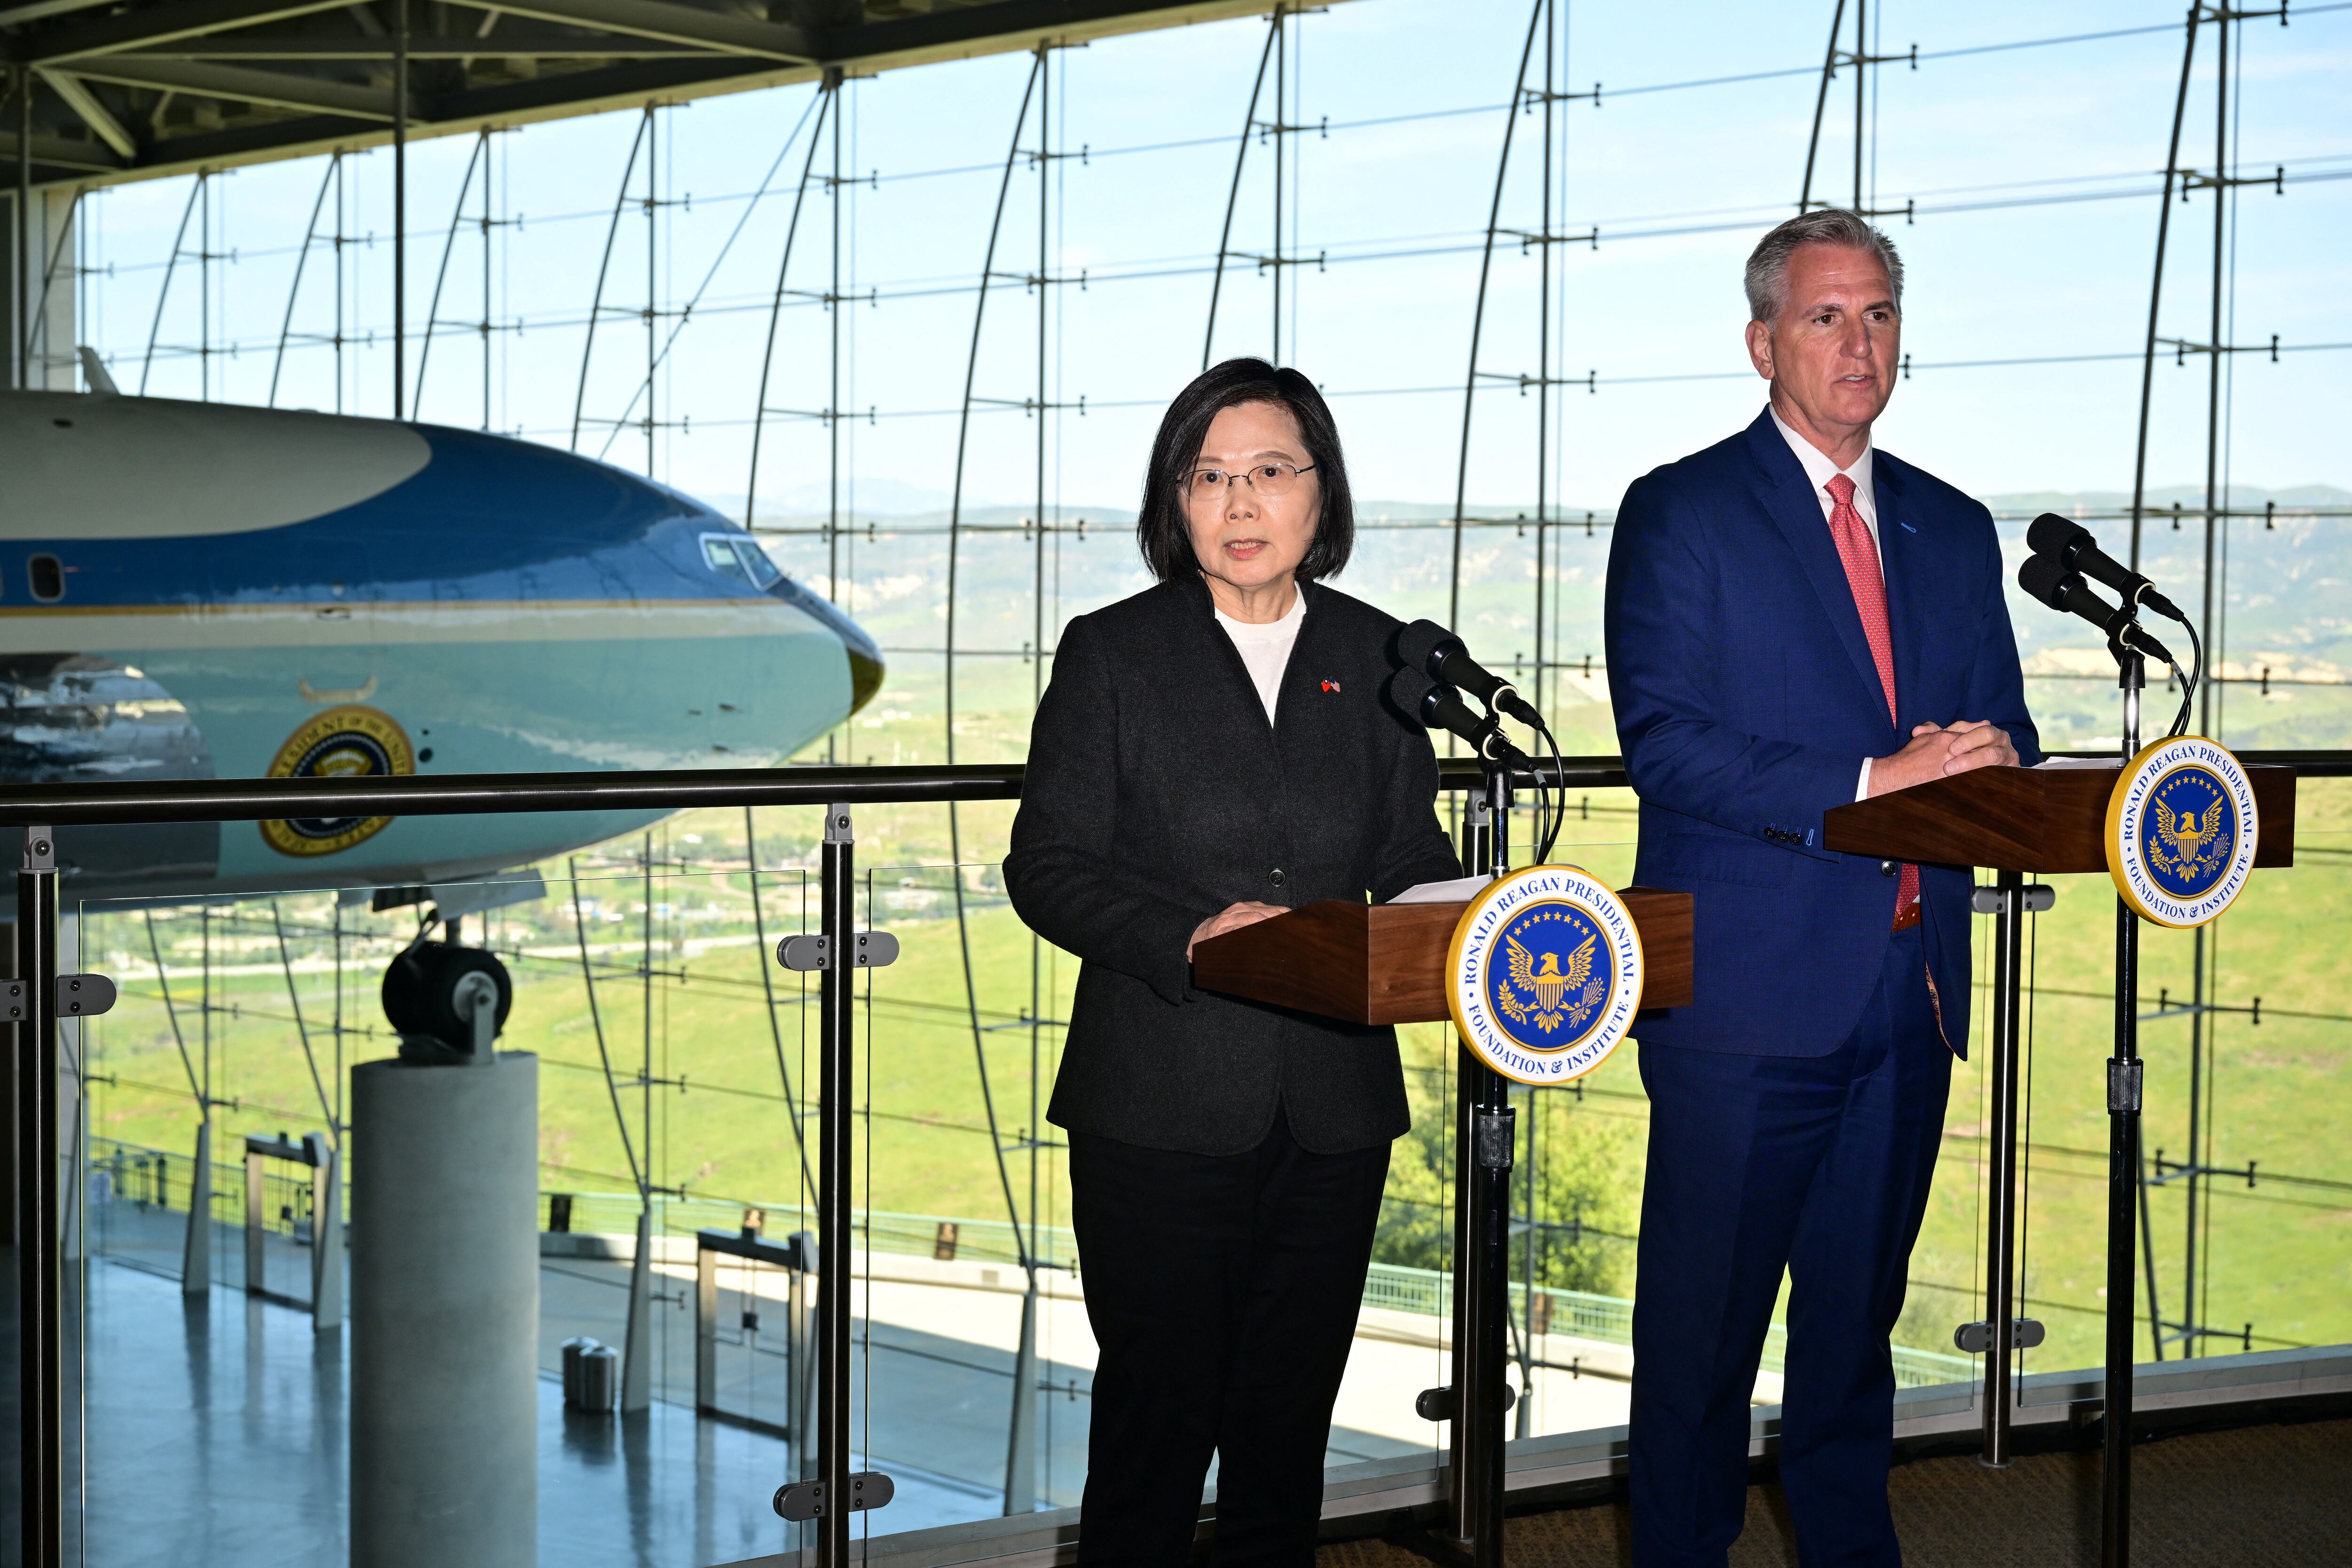 U.S. House Speaker Kevin McCarthy (R) and Taiwanese President Tsai Ing-wen speak to reporters after a meeting in Simi Valley, California, April 5, 2023 (Photo by Frederic J. Brown/ AFP).